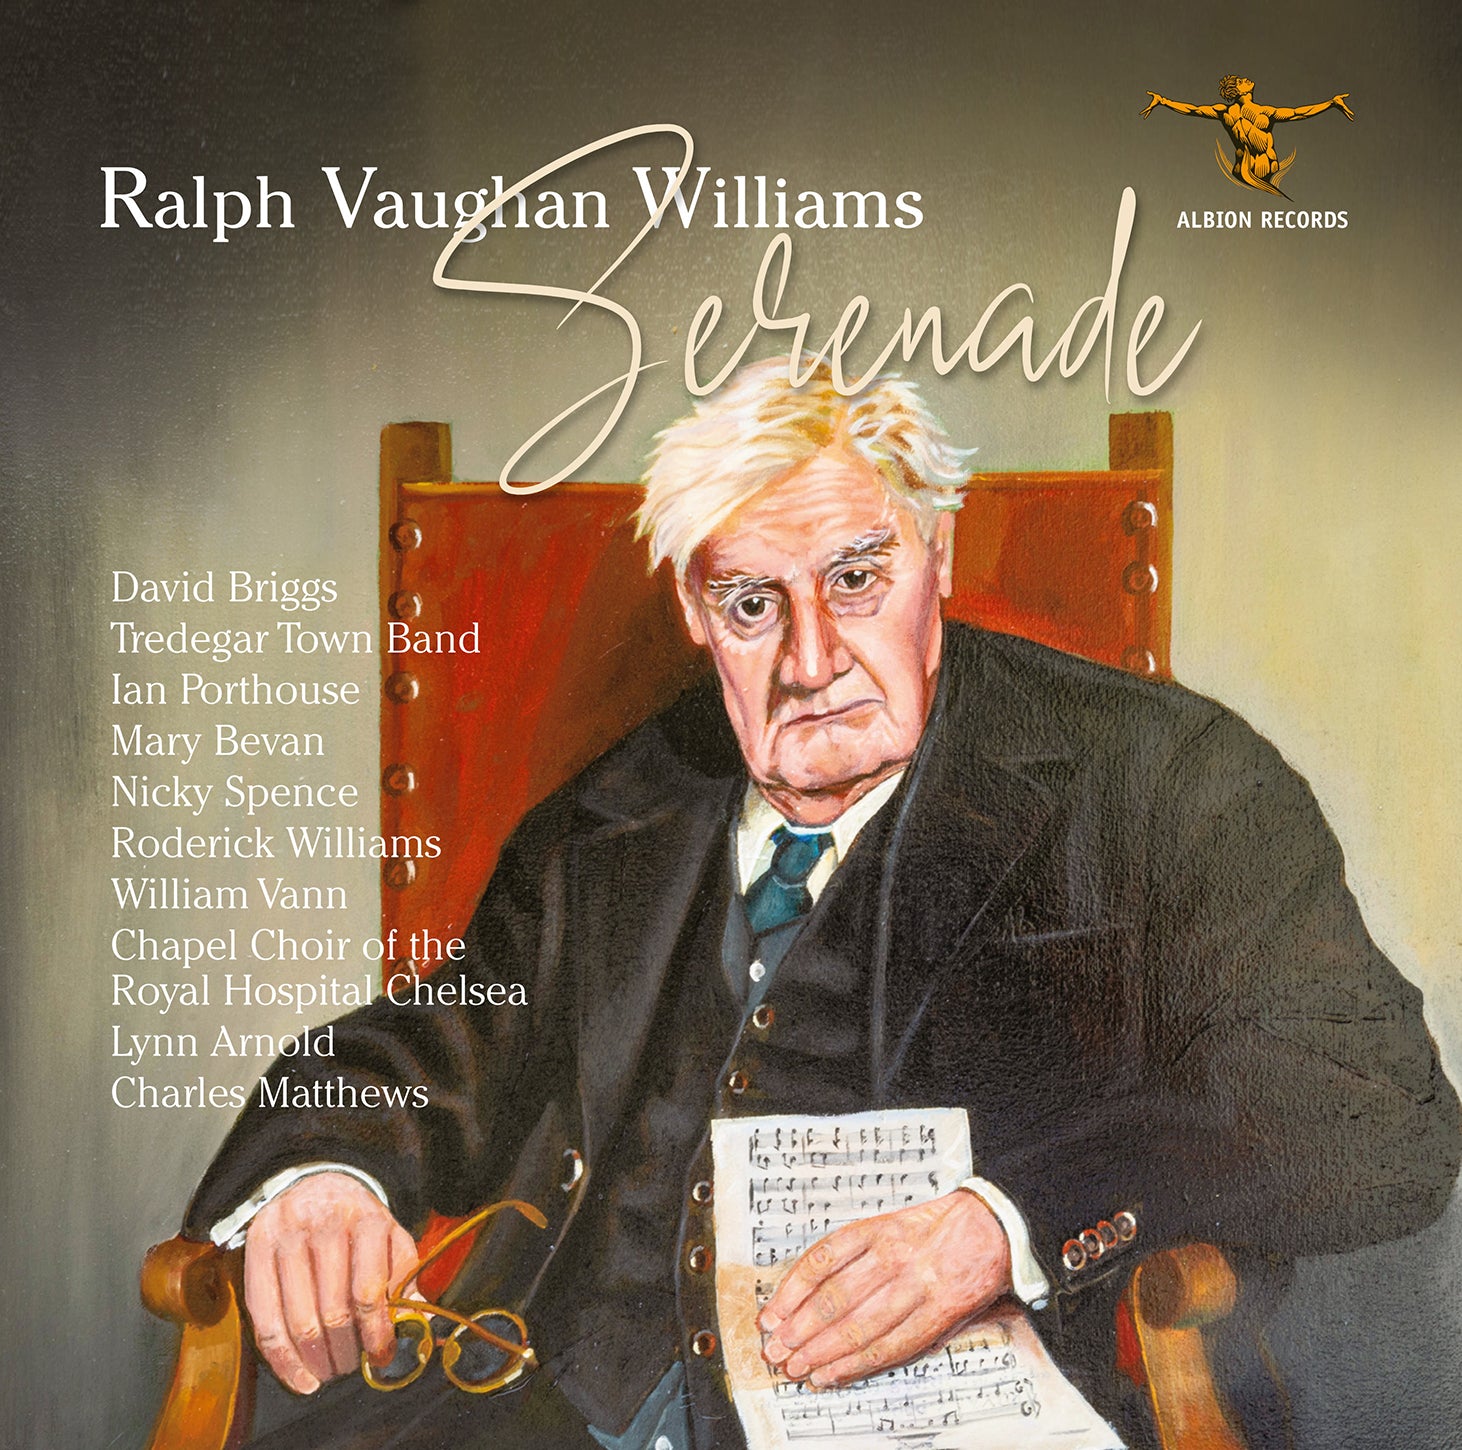 Vaughan Williams: Serenade - 150th Birthday Collection for Voices, Keyboards & Band